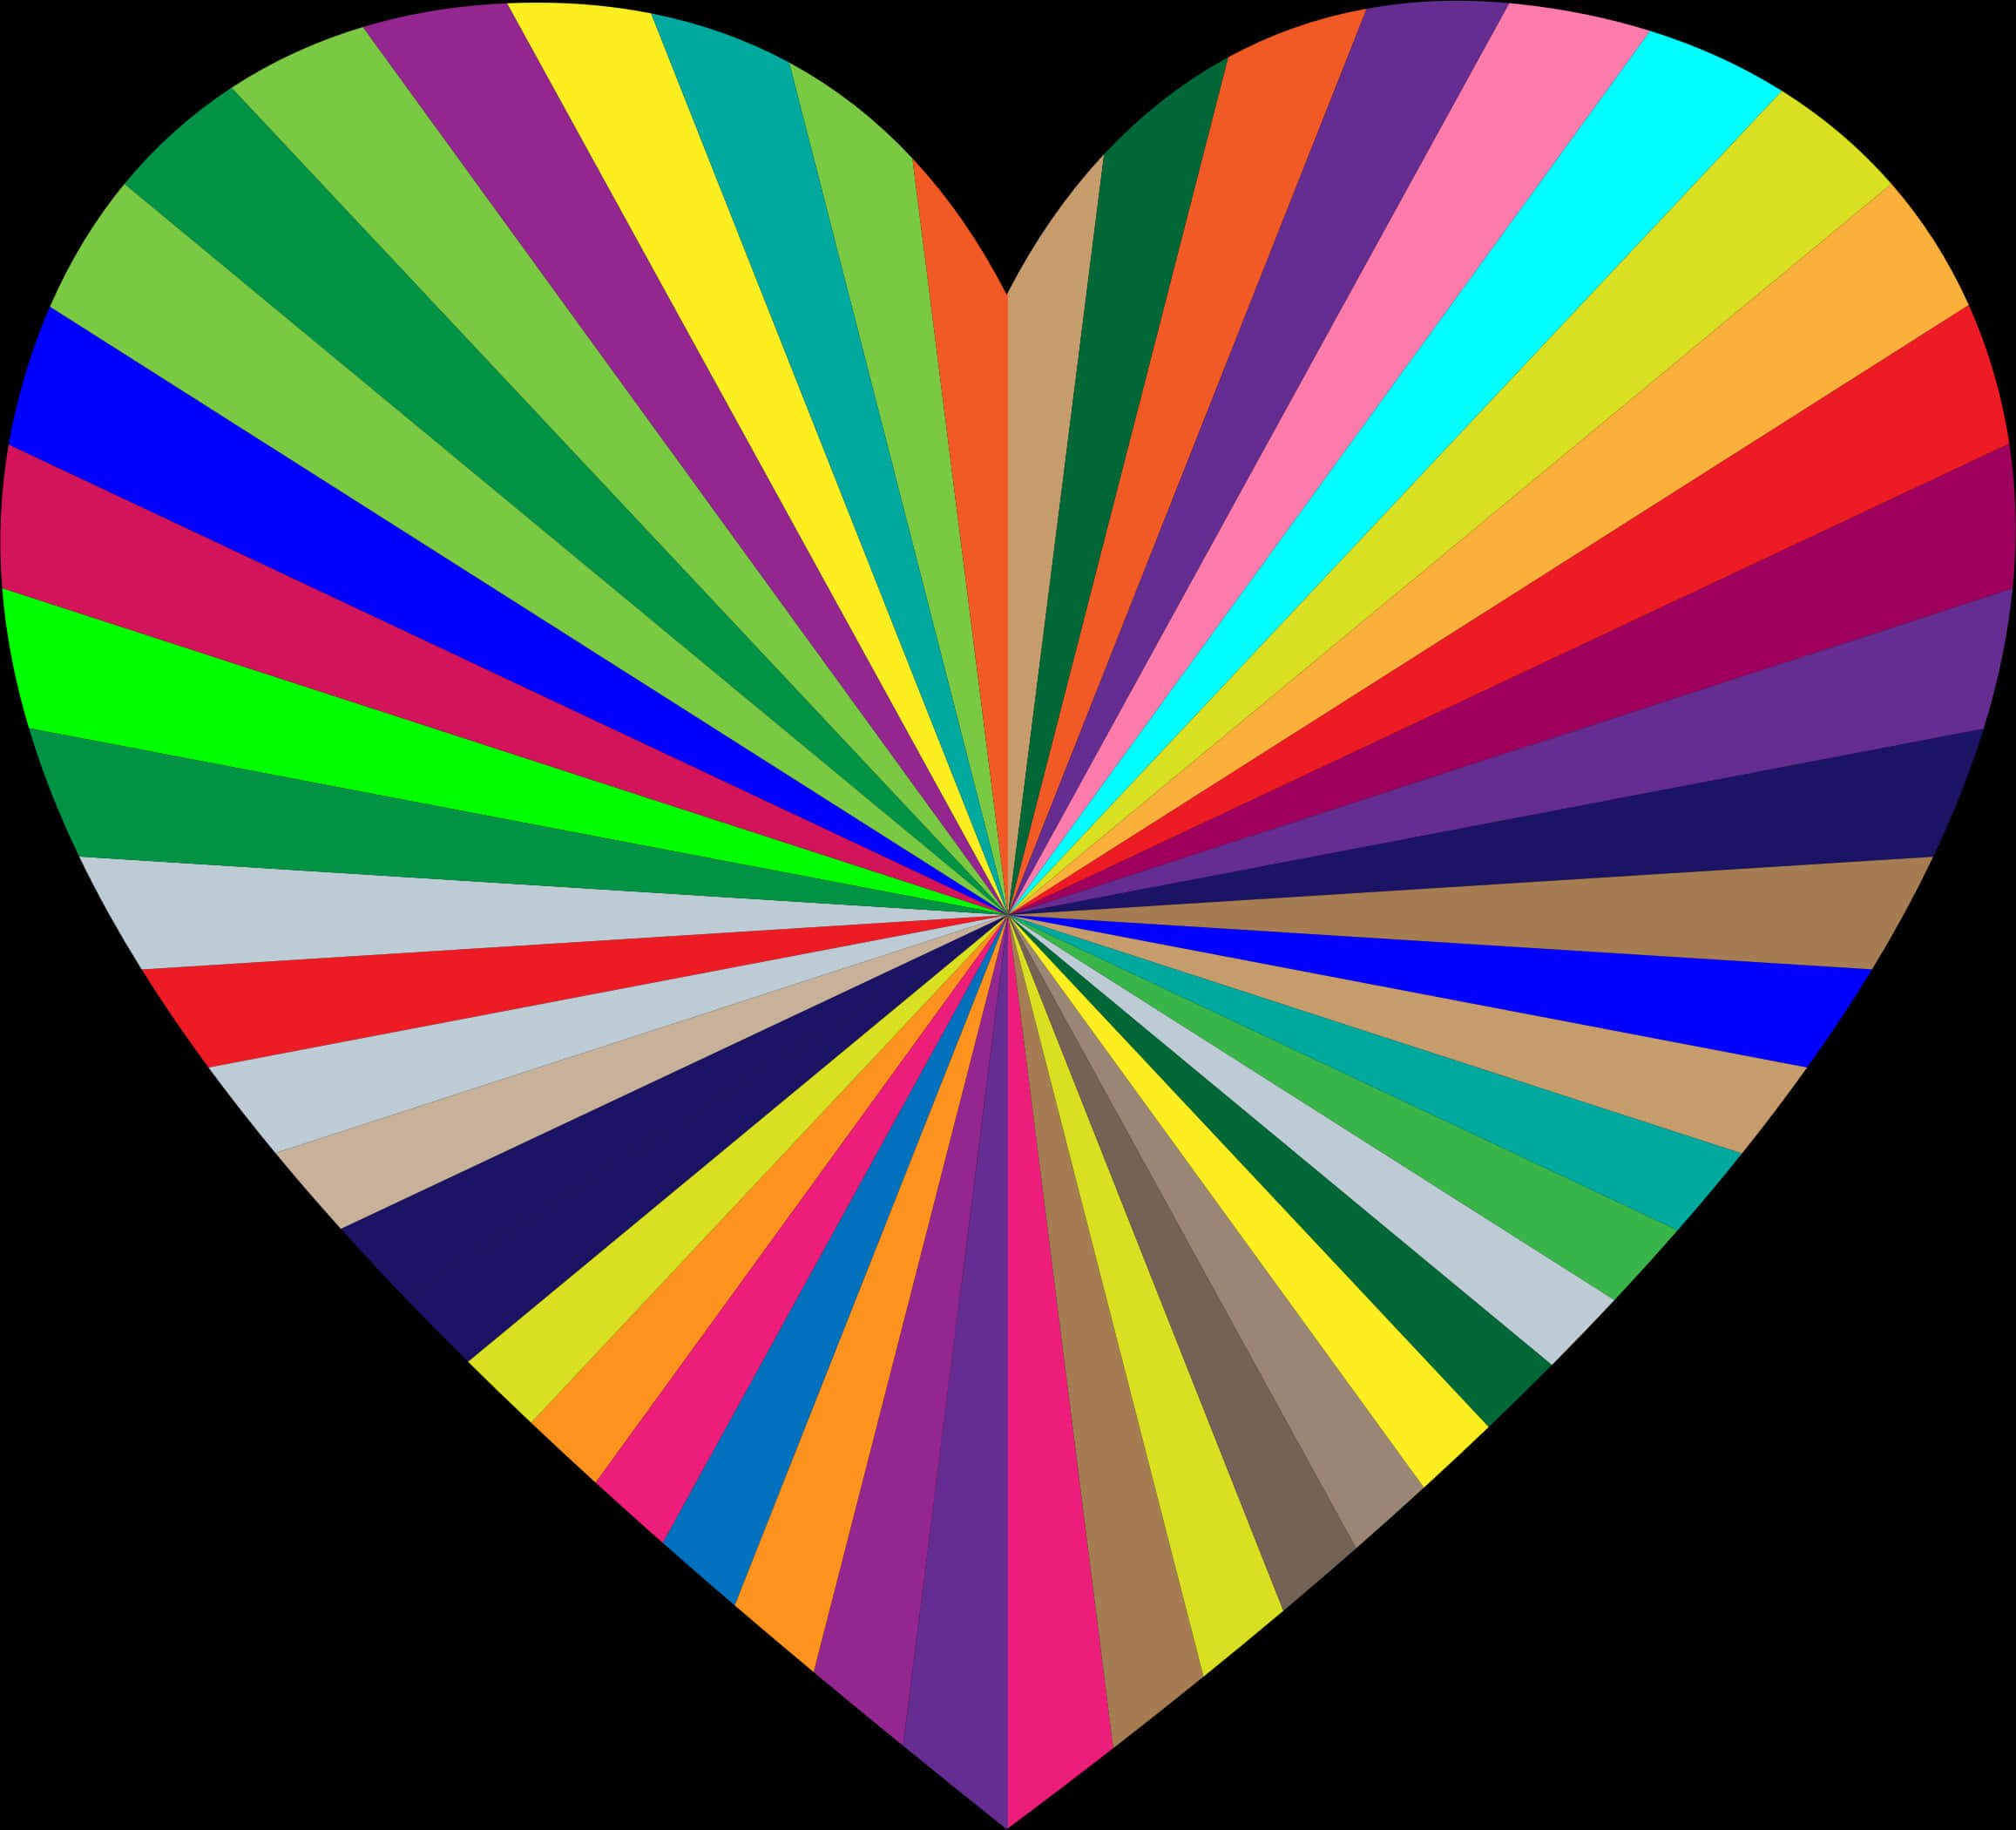 Colorful Heart Starburst Pattern PNG